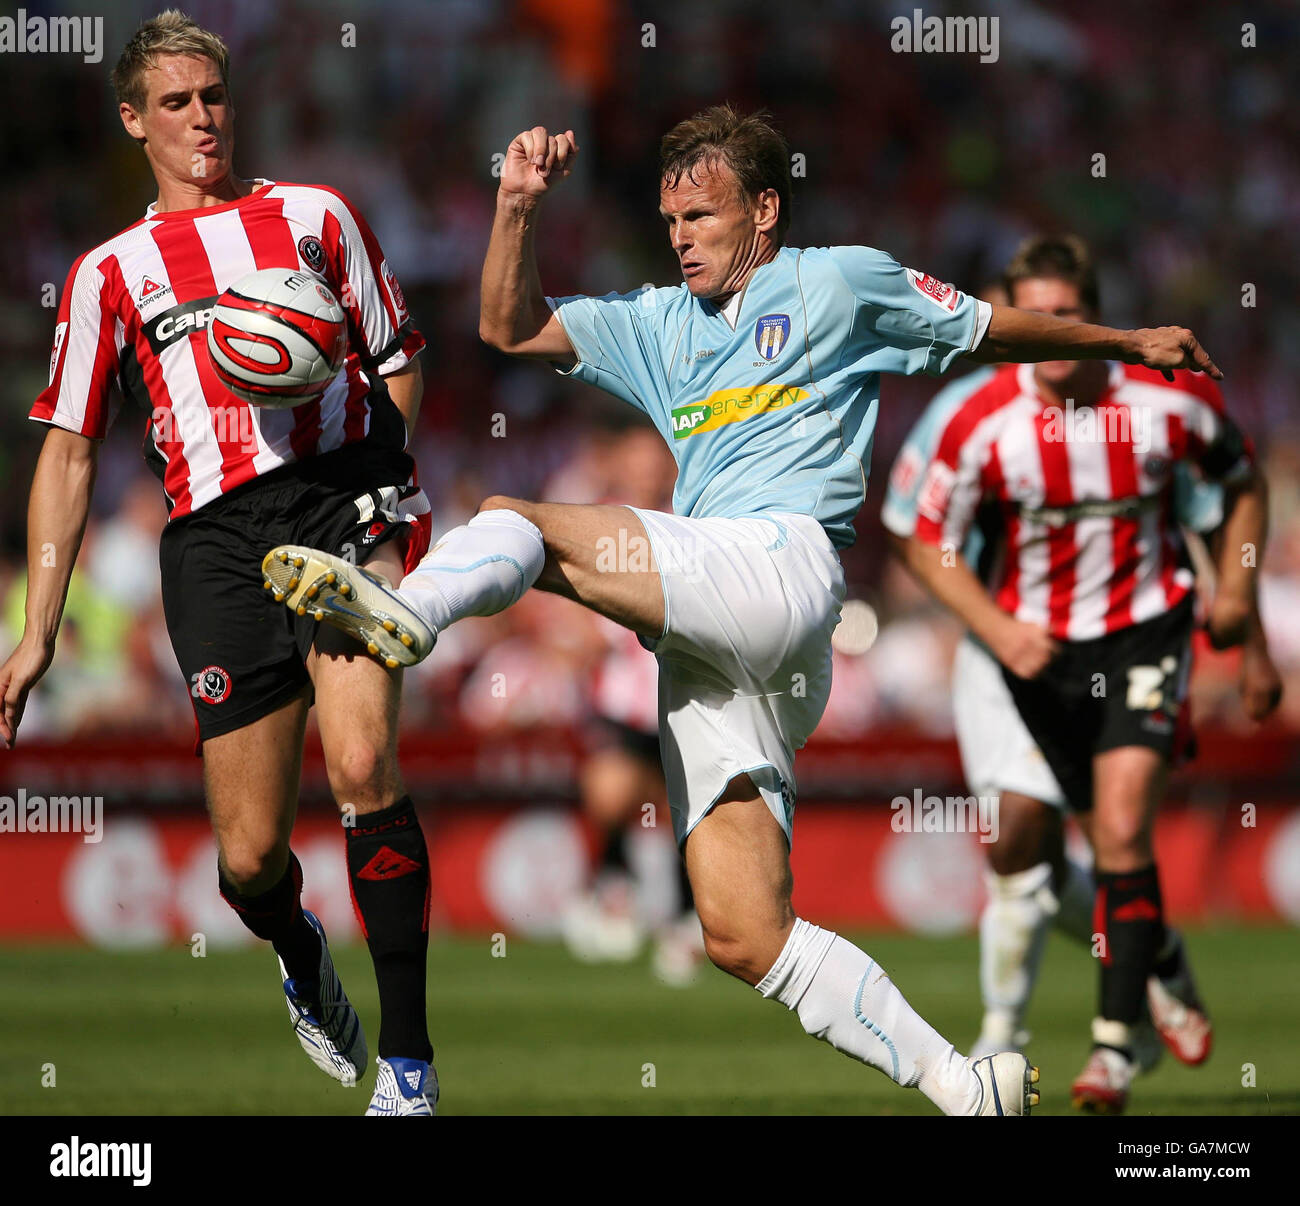 Colchester United's Teddy Sheringham in action against Sheffield United's David Carney (left) during the Coca-Cola Football League Championship match at Bramall Lane, Sheffield. Stock Photo